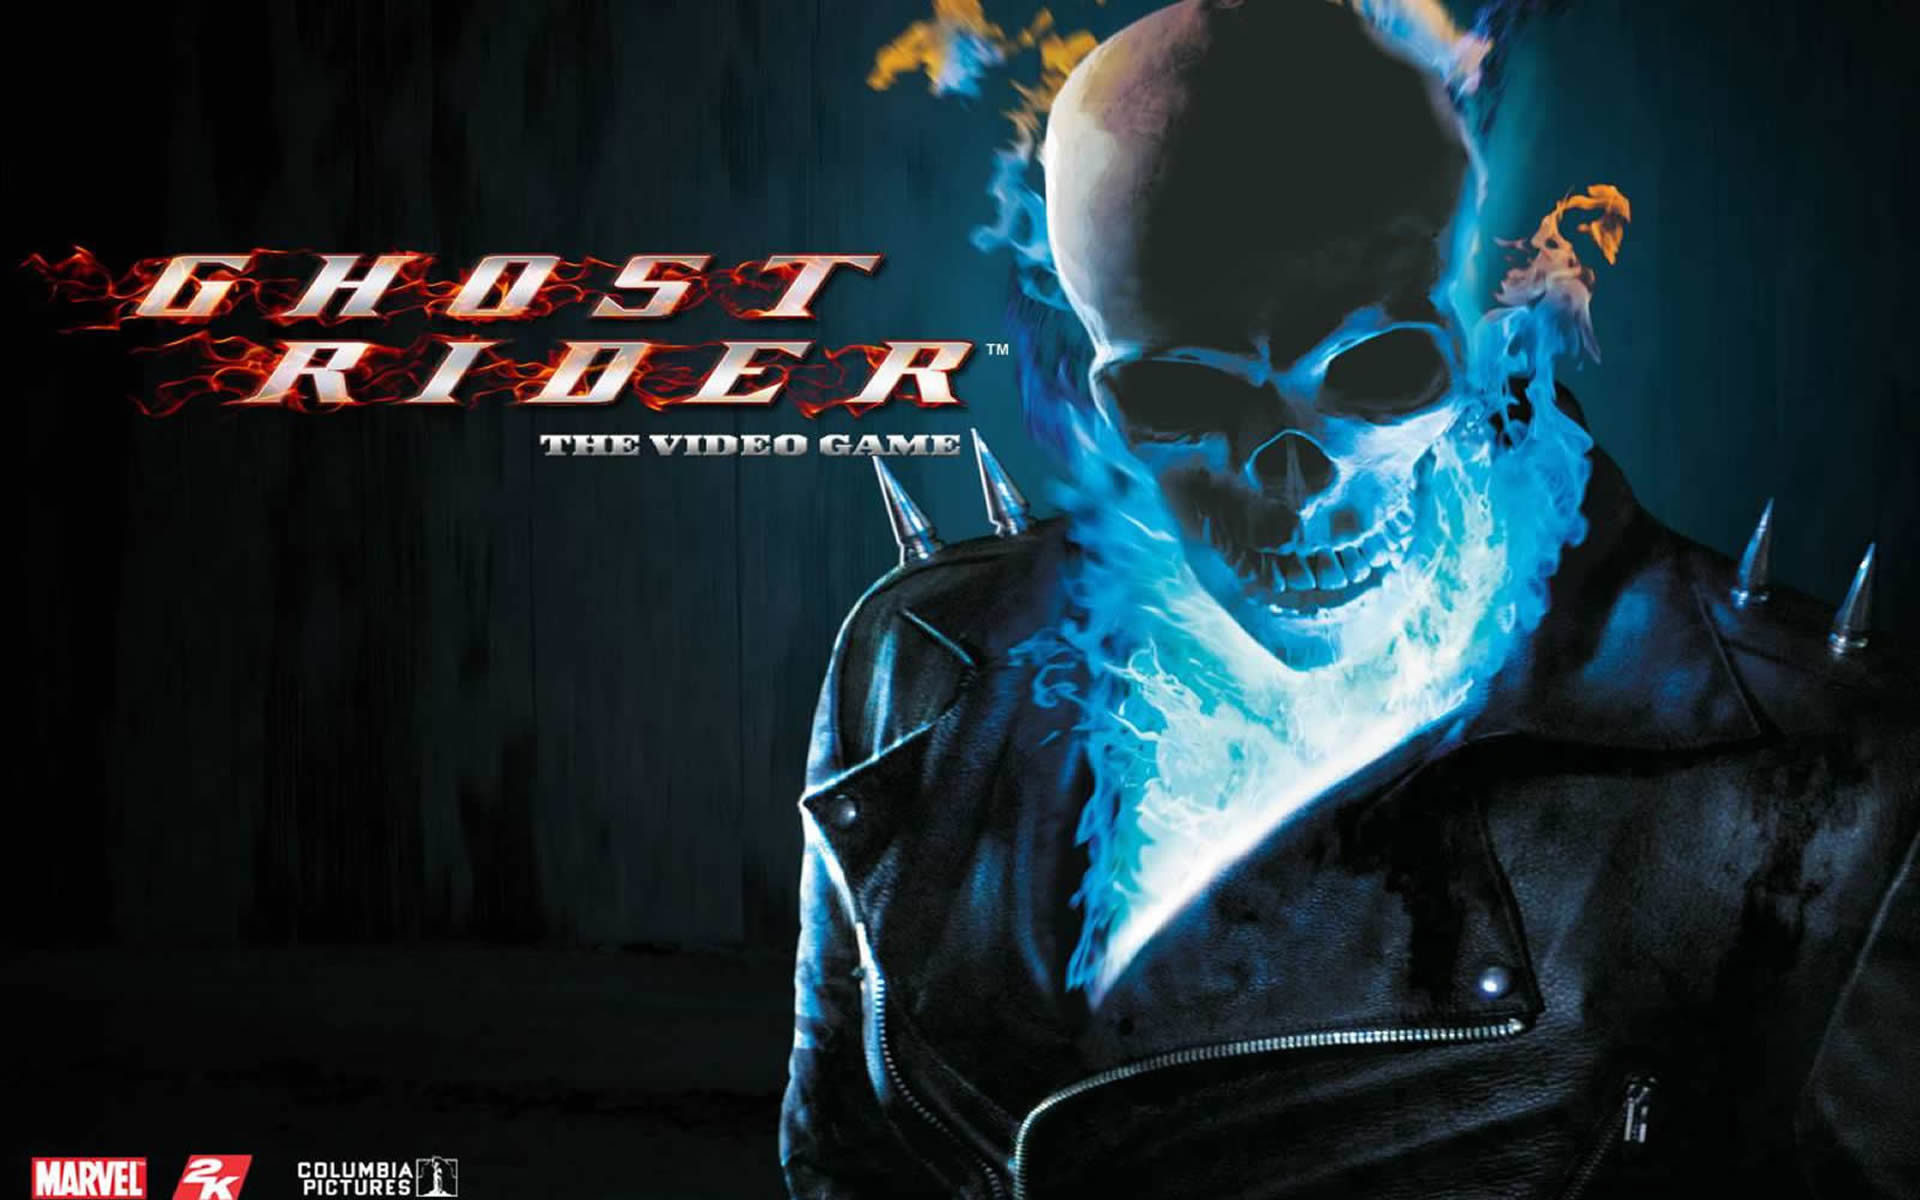 1920x1200 Blue Flame Skull - Superhero Games Wallpaper Image featuring Ghost .